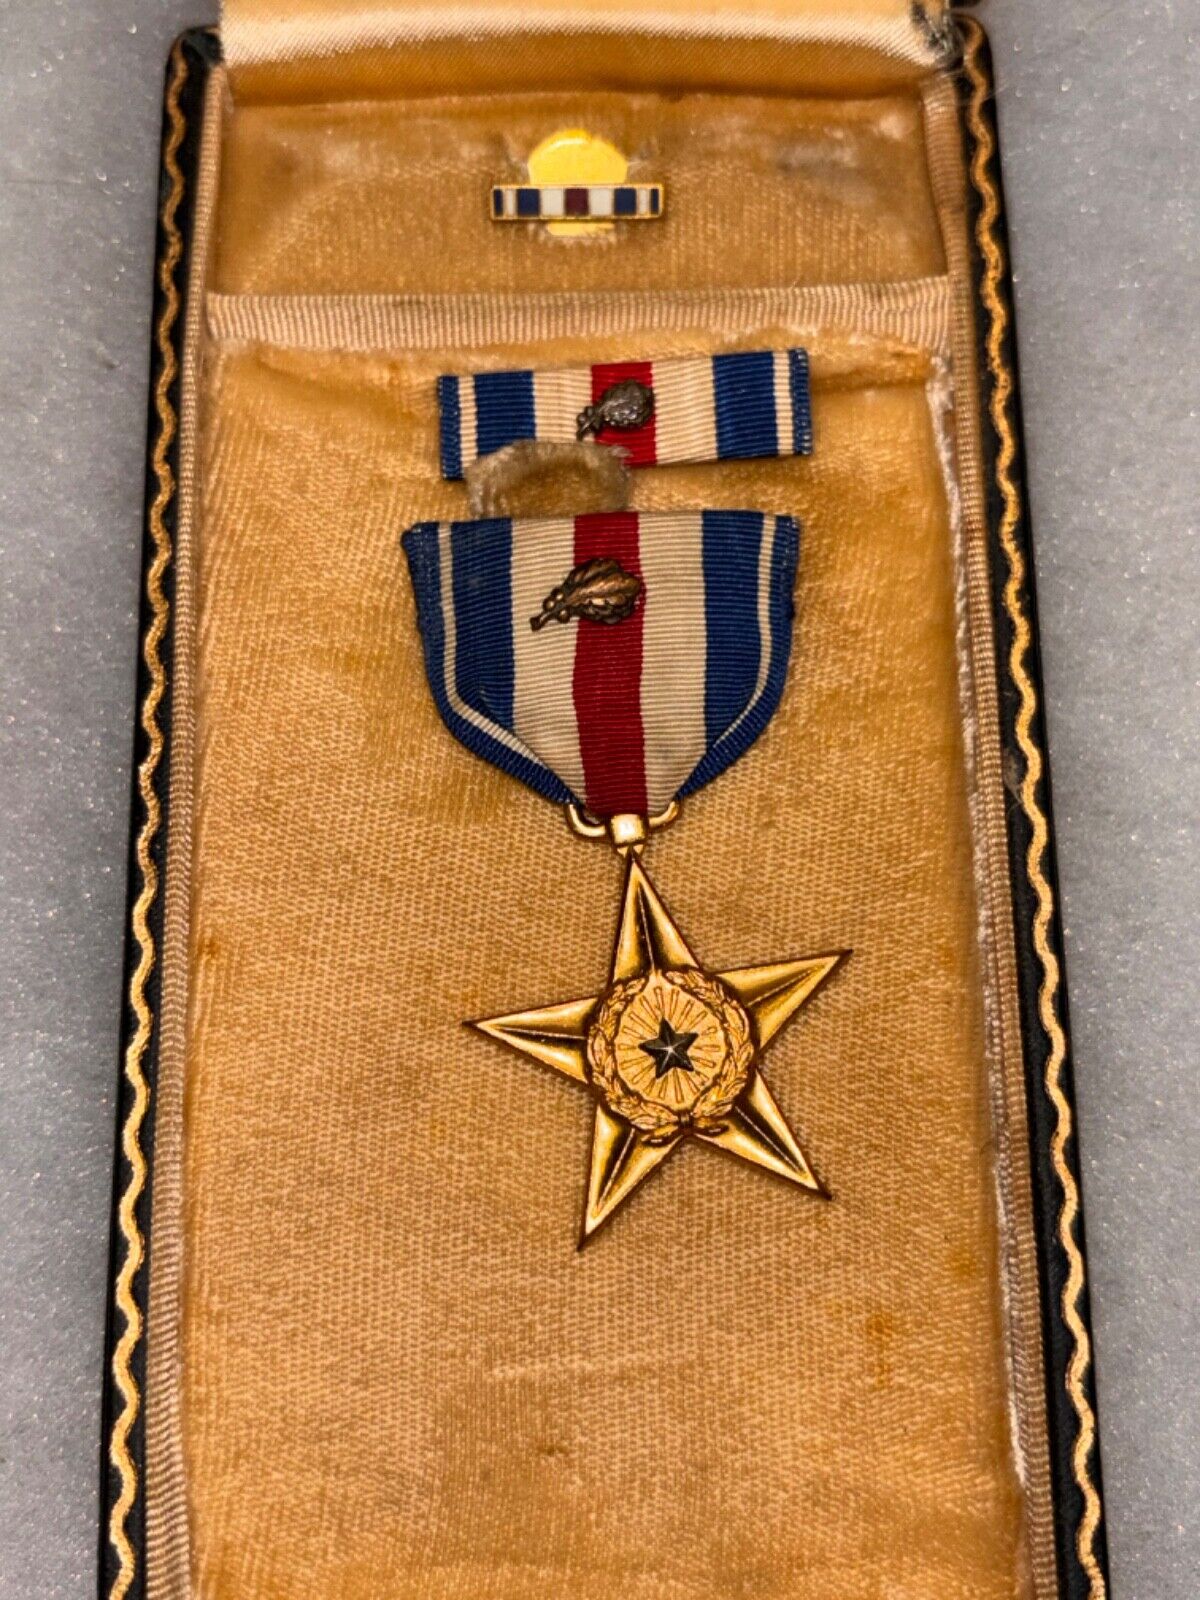 Original WW2 Gallantry Star Medal With Ribbon, Lapel Pin and Case